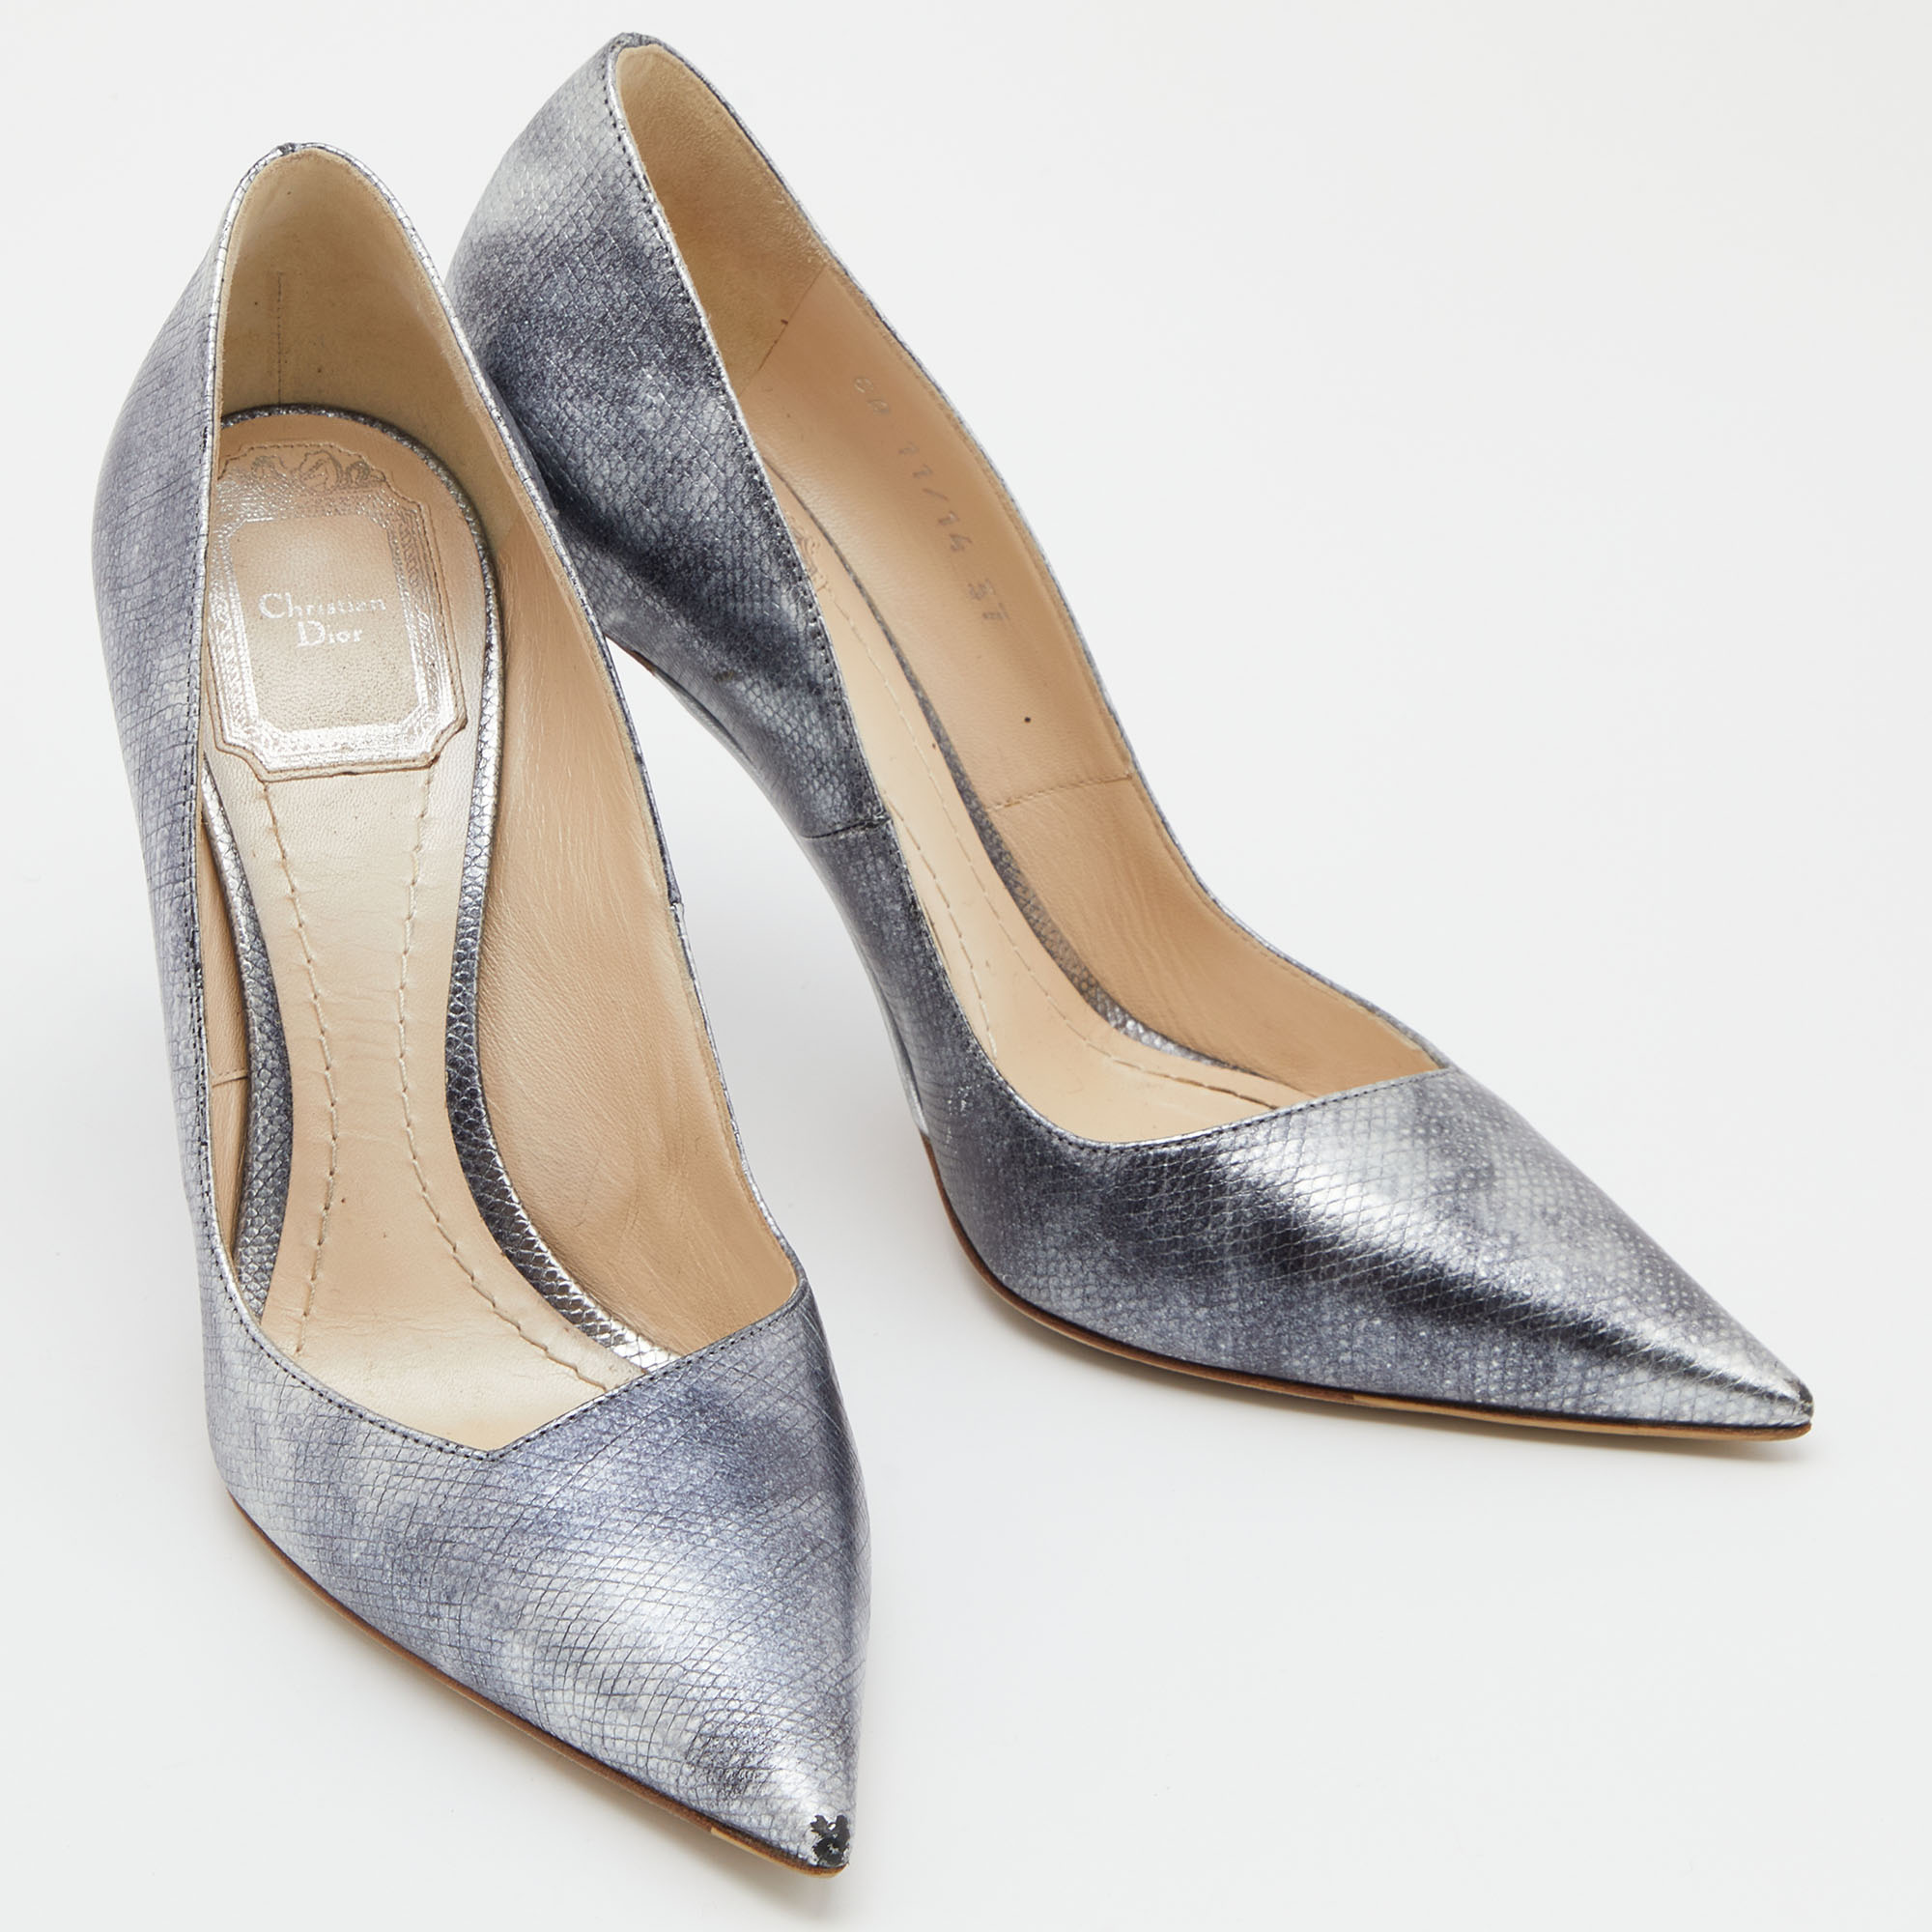 Dior Silver Python Effect Leather Songe Pumps Size 37